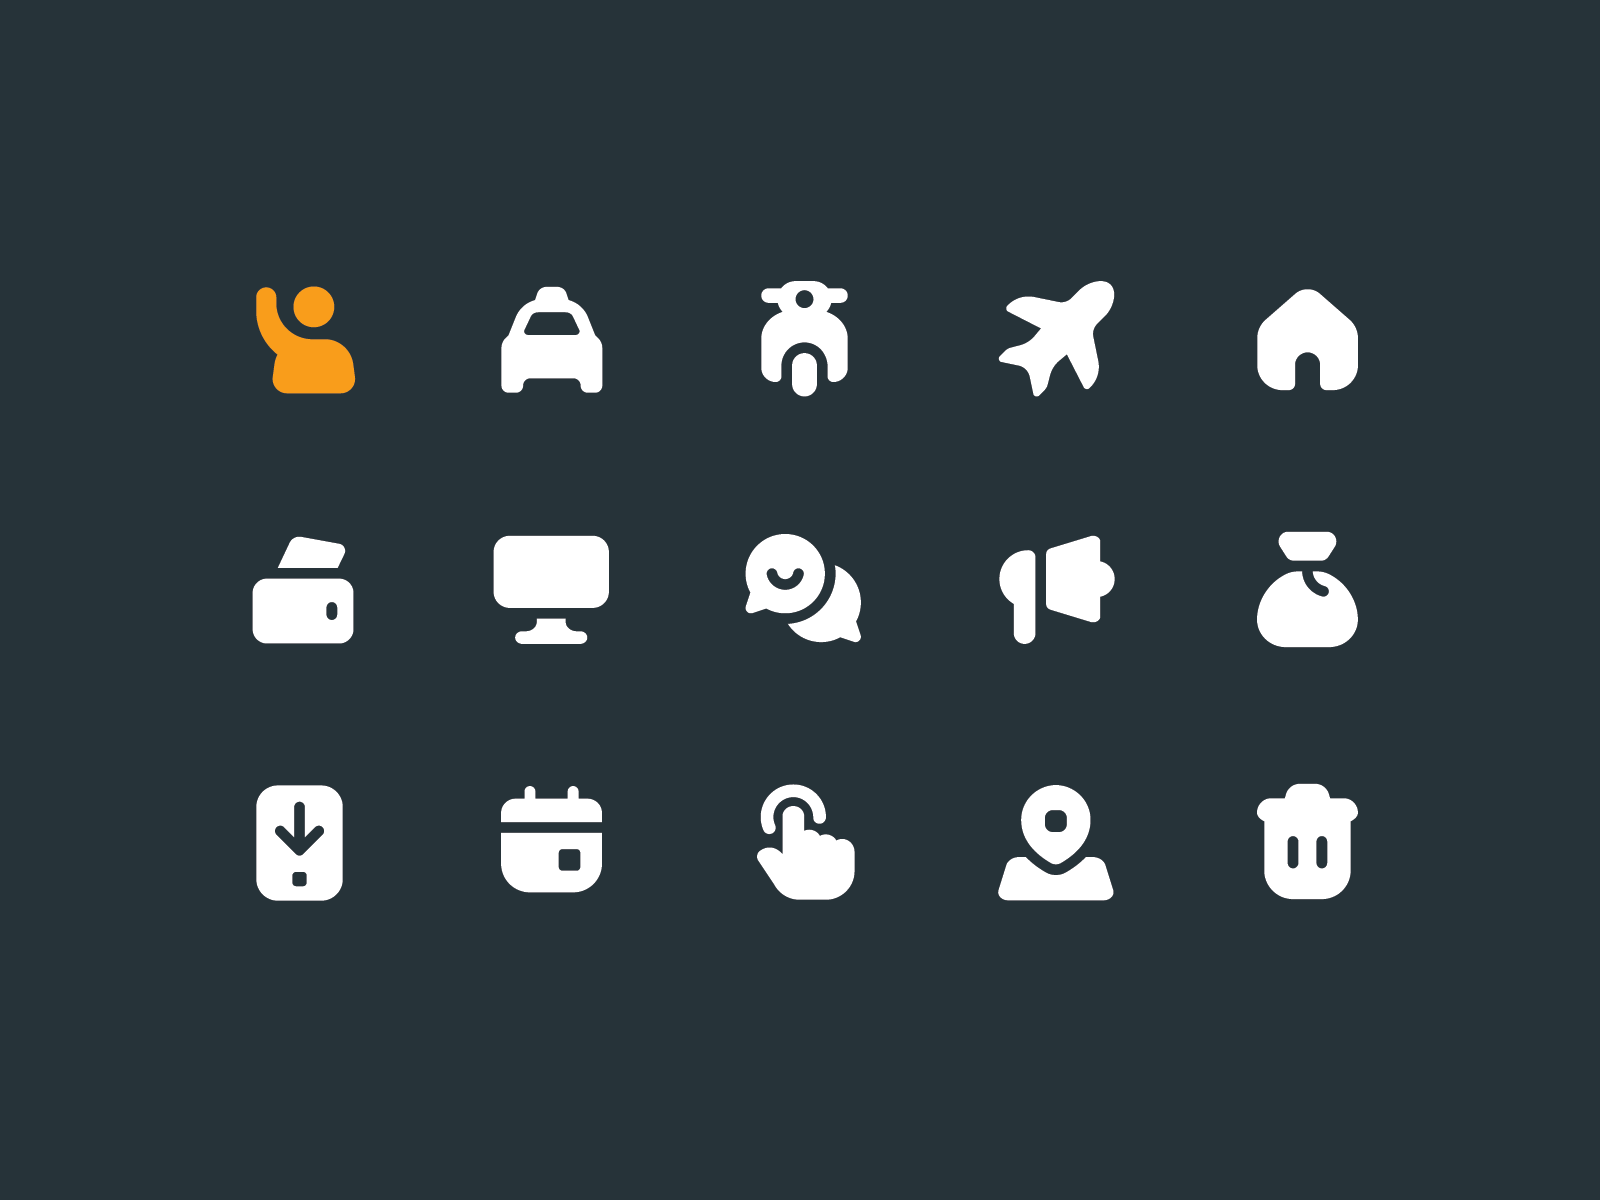 Gett Iconography System + Style Guide app icons brand icons gett icon icon design icon designer icon system iconography icons marketing icons squircle